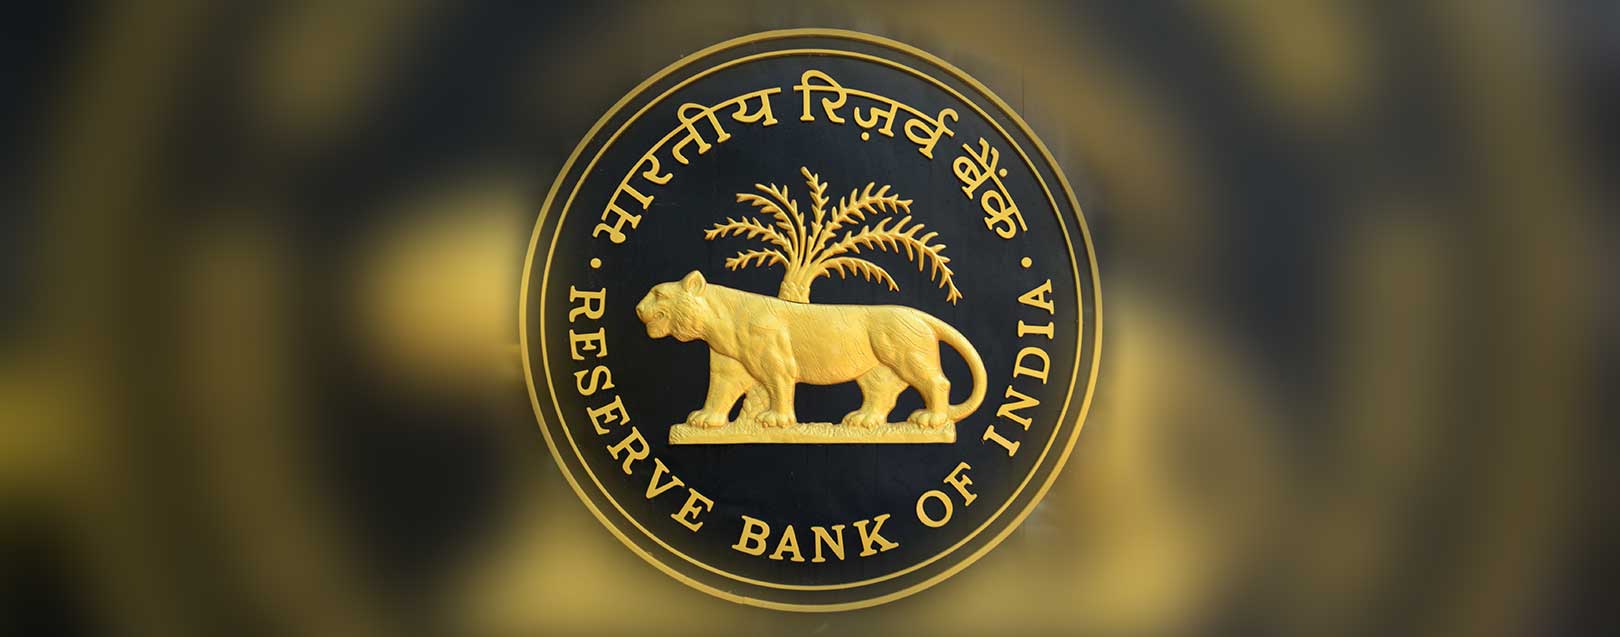 PDMA to replace RBI as Natl. debt manager by Q4’18